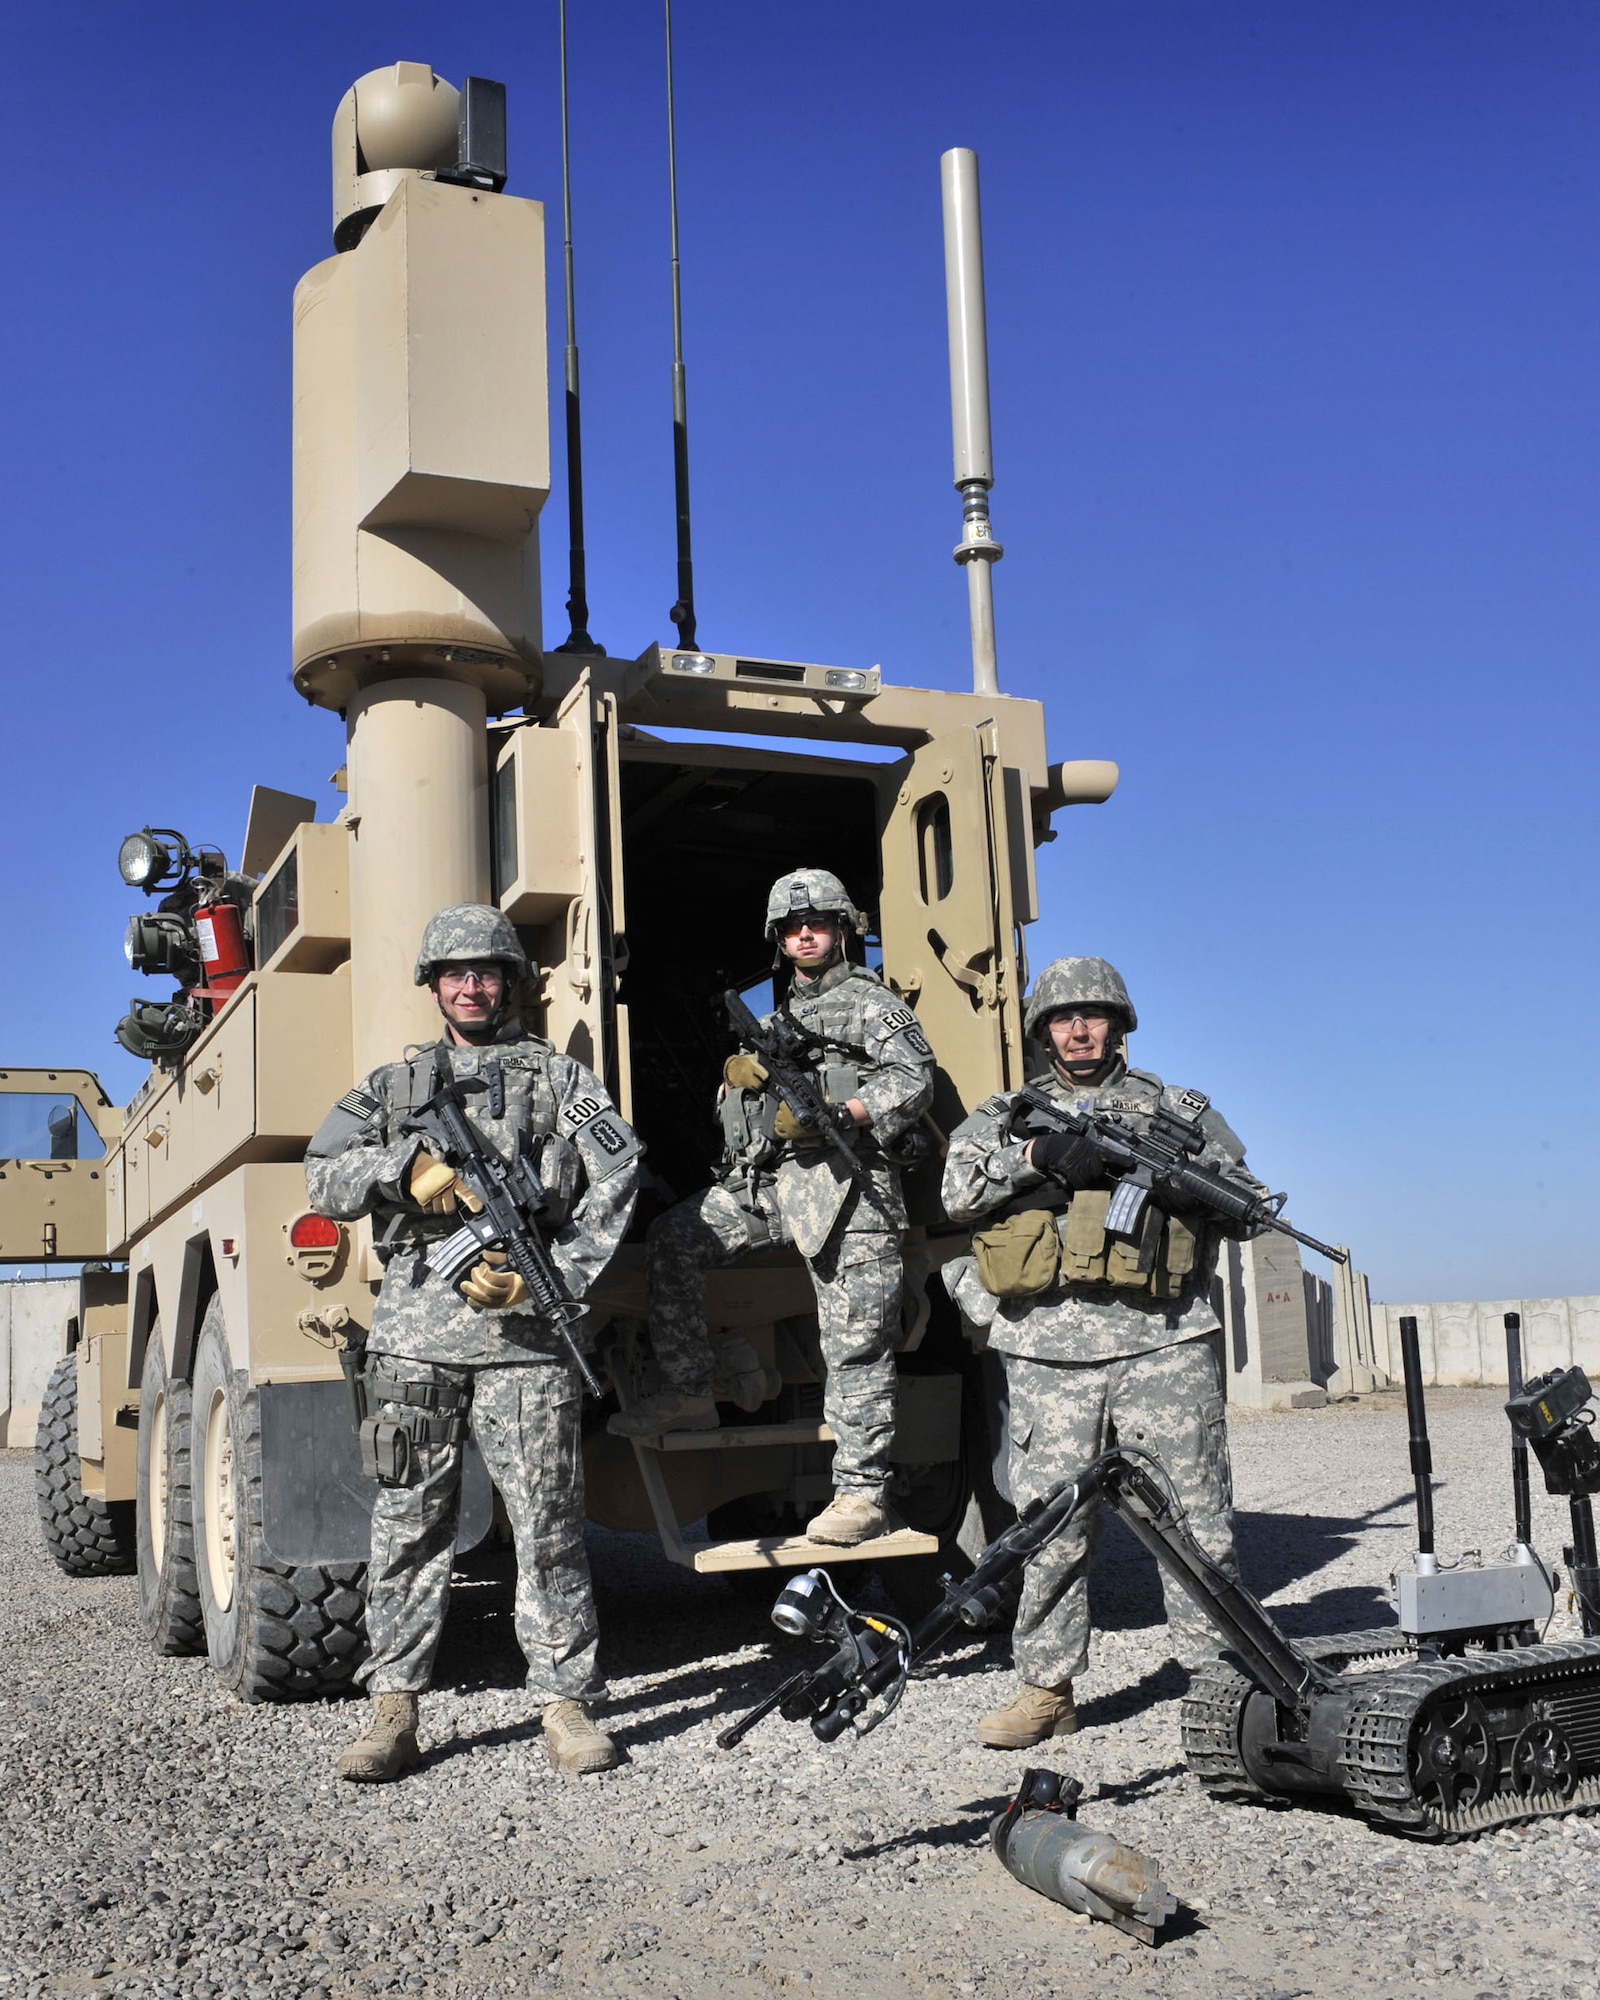 Explosive Ordnance Disposal Team One, Airman 1st Class Derrick Torba, Staff Sgt. Michael Breive and Tech. Sgt. Jeffrey Wasik, take a moment out of their busy schedule to pose in front of a Joint explosive ordnance disposal rapid response vehicle or JERRV Dec. 17 at Sather Air Base, Iraq. All three are EOD technicians assigned to the 447th Expeditionary Civil Engineer Squadron Explosive Ordnance Disposal Flight, Alpha (U.S. Air Force photo/Master Sgt. Brian Davidson)